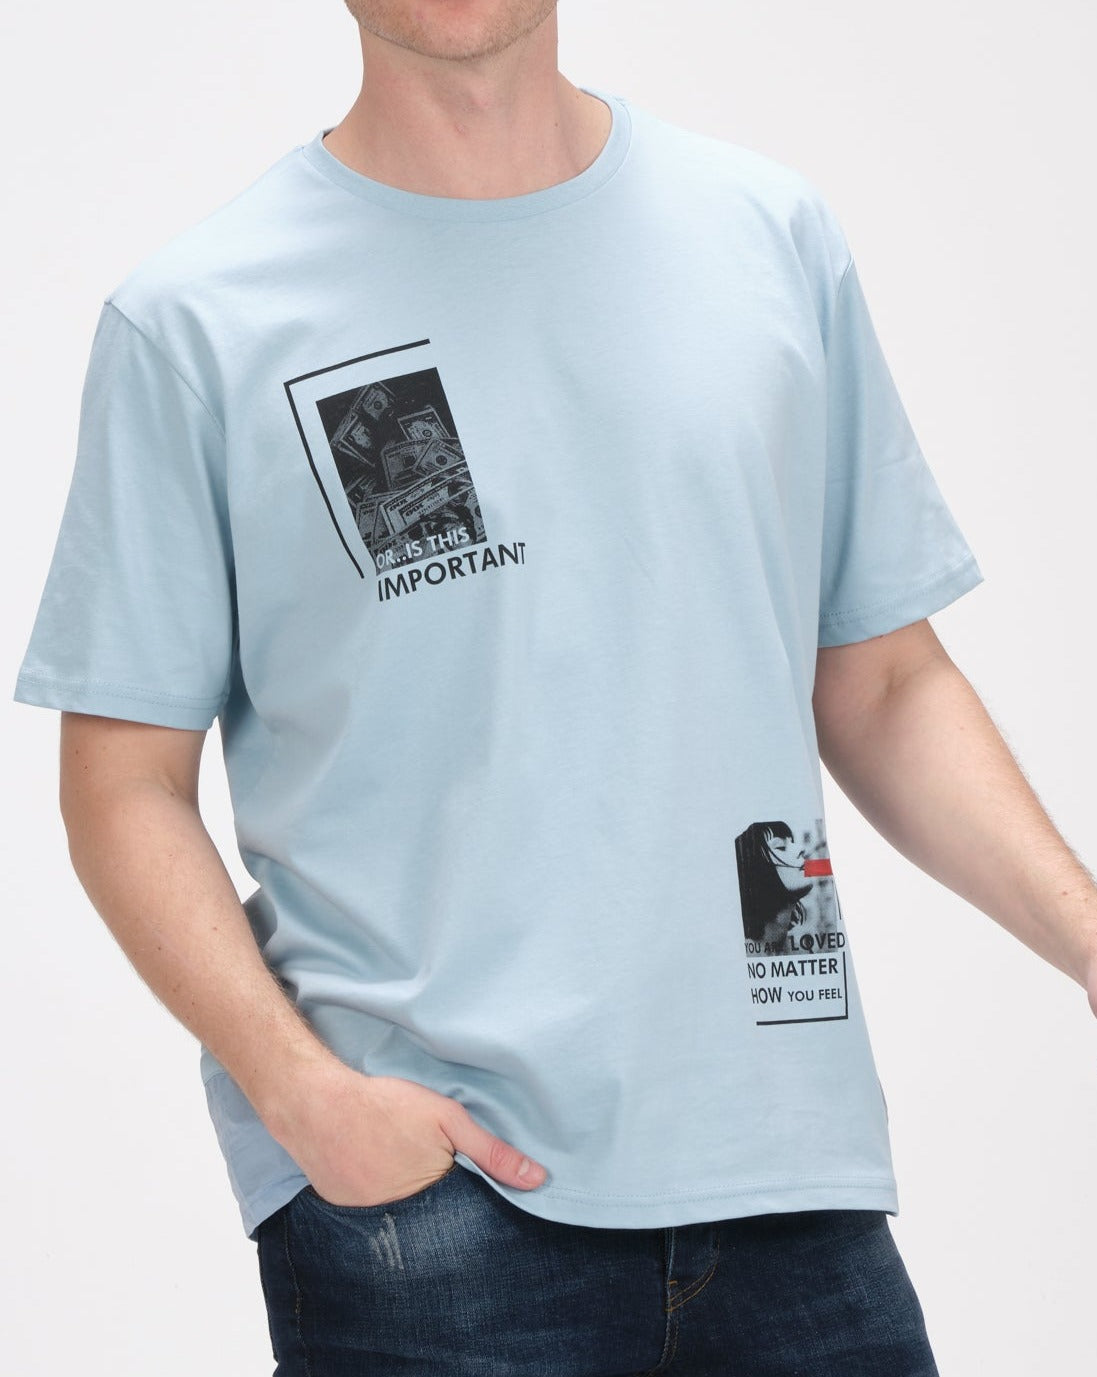 N° 8177 Important Tee - Blue - Ron Tomson